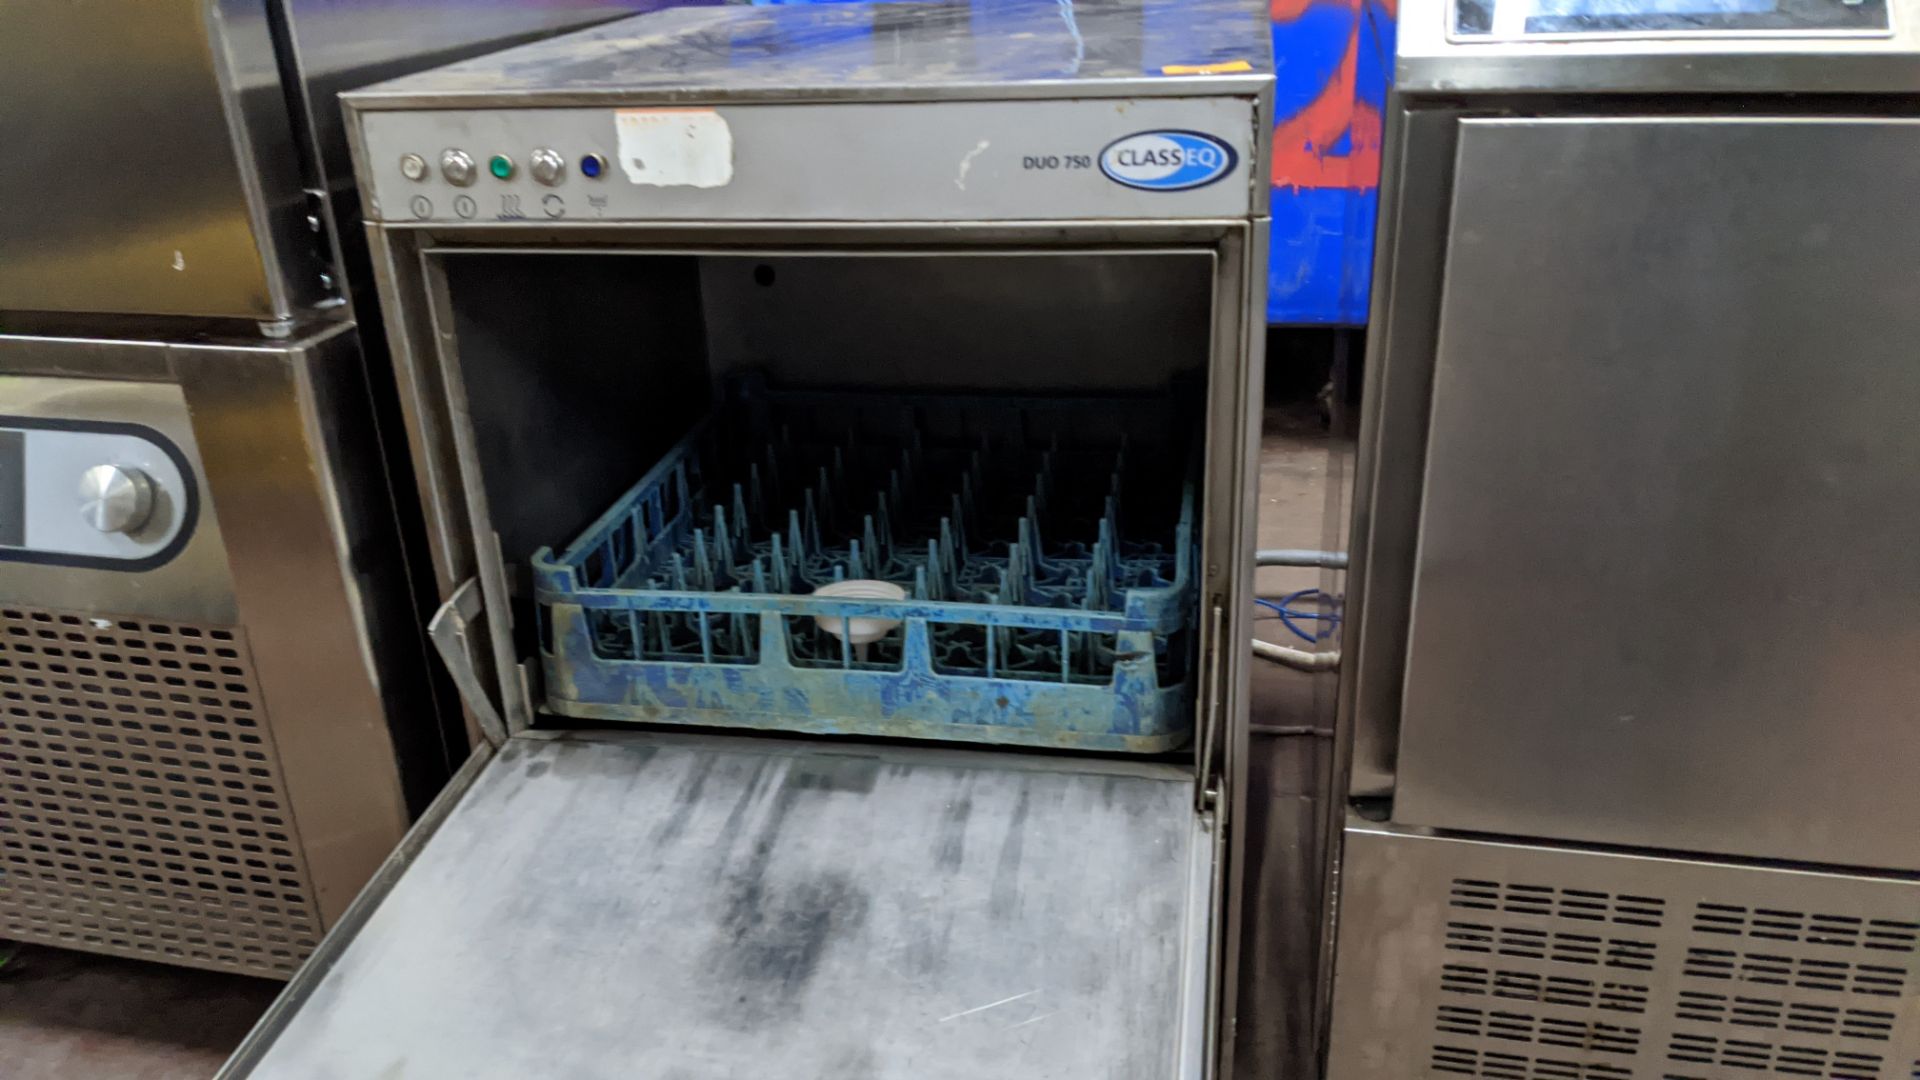 Classeq Duo 750 stainless steel undercounter glass washer - Image 3 of 5